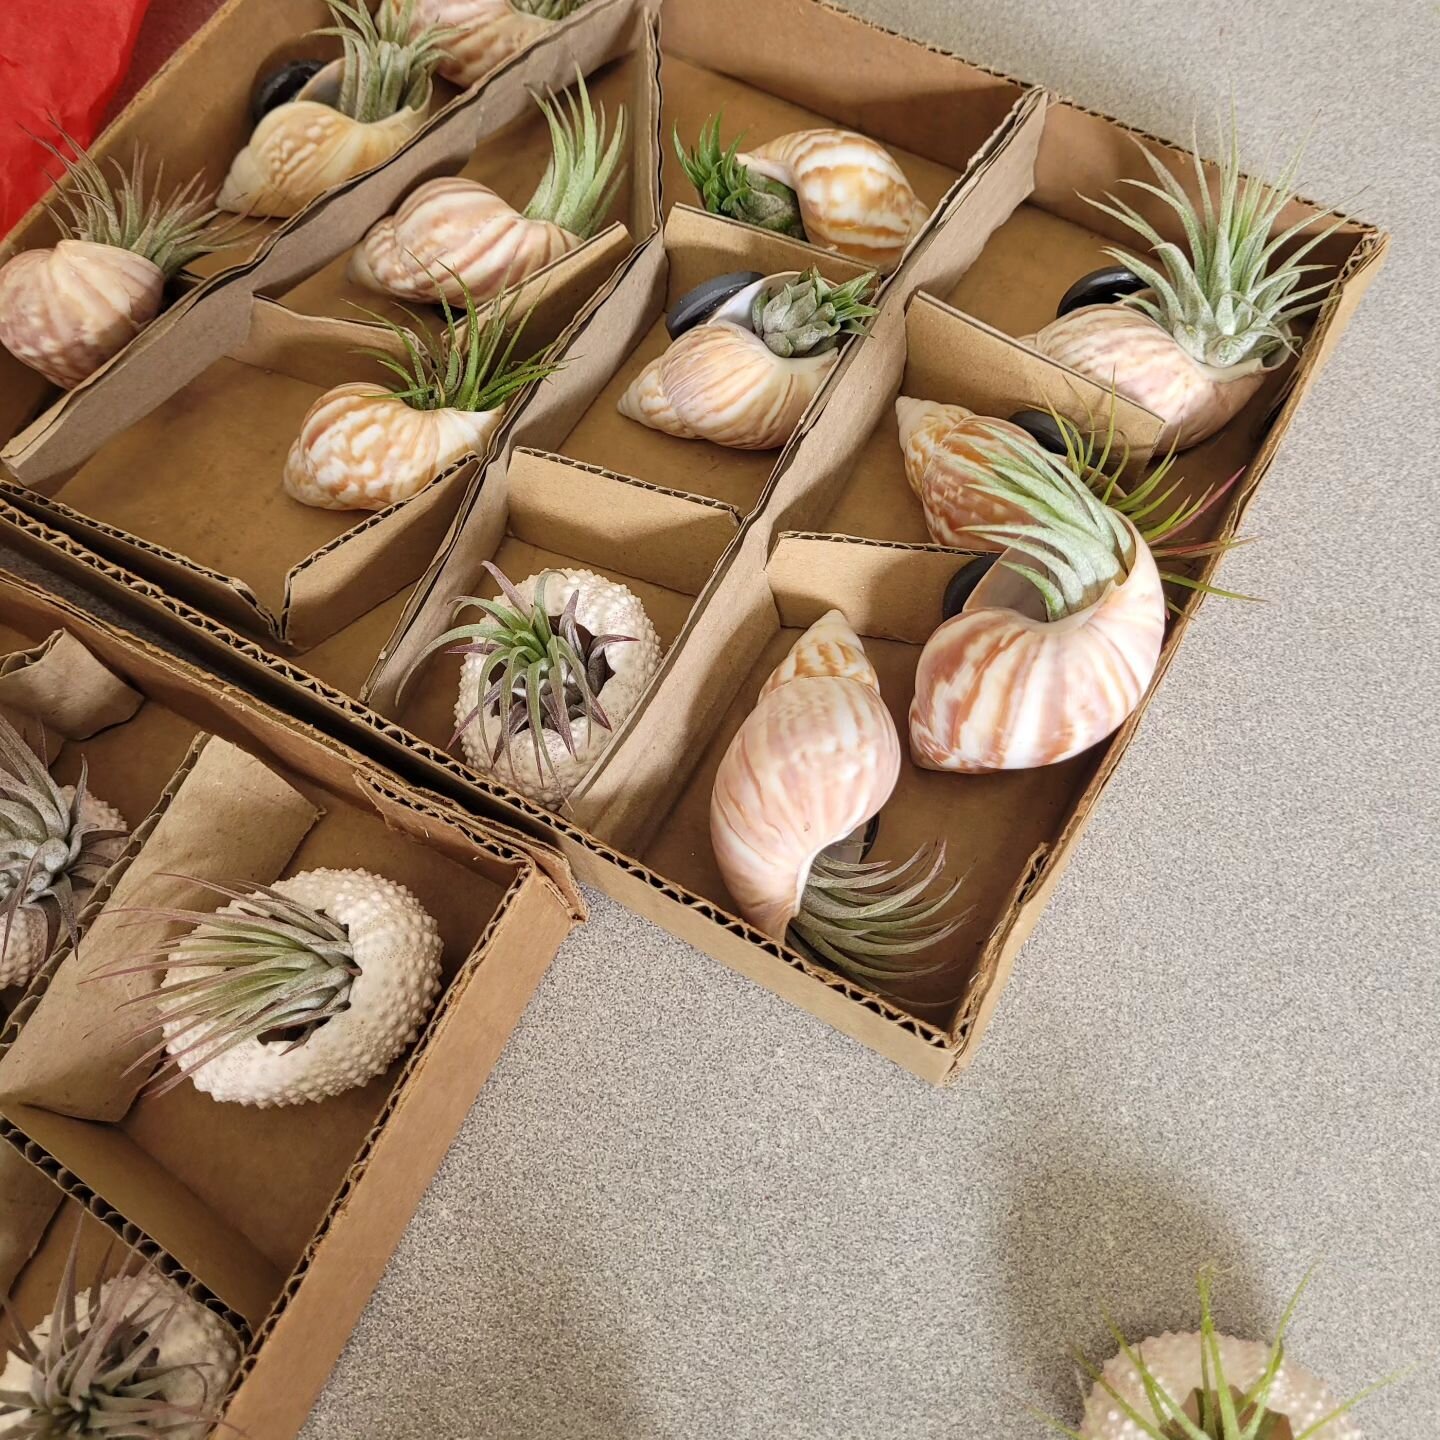 Our students are assembling the air plant shell planters and magnets for our plant sale tomorrow, May 6th, 9am-12pm

We will also have baked goods.
Hope to see you!